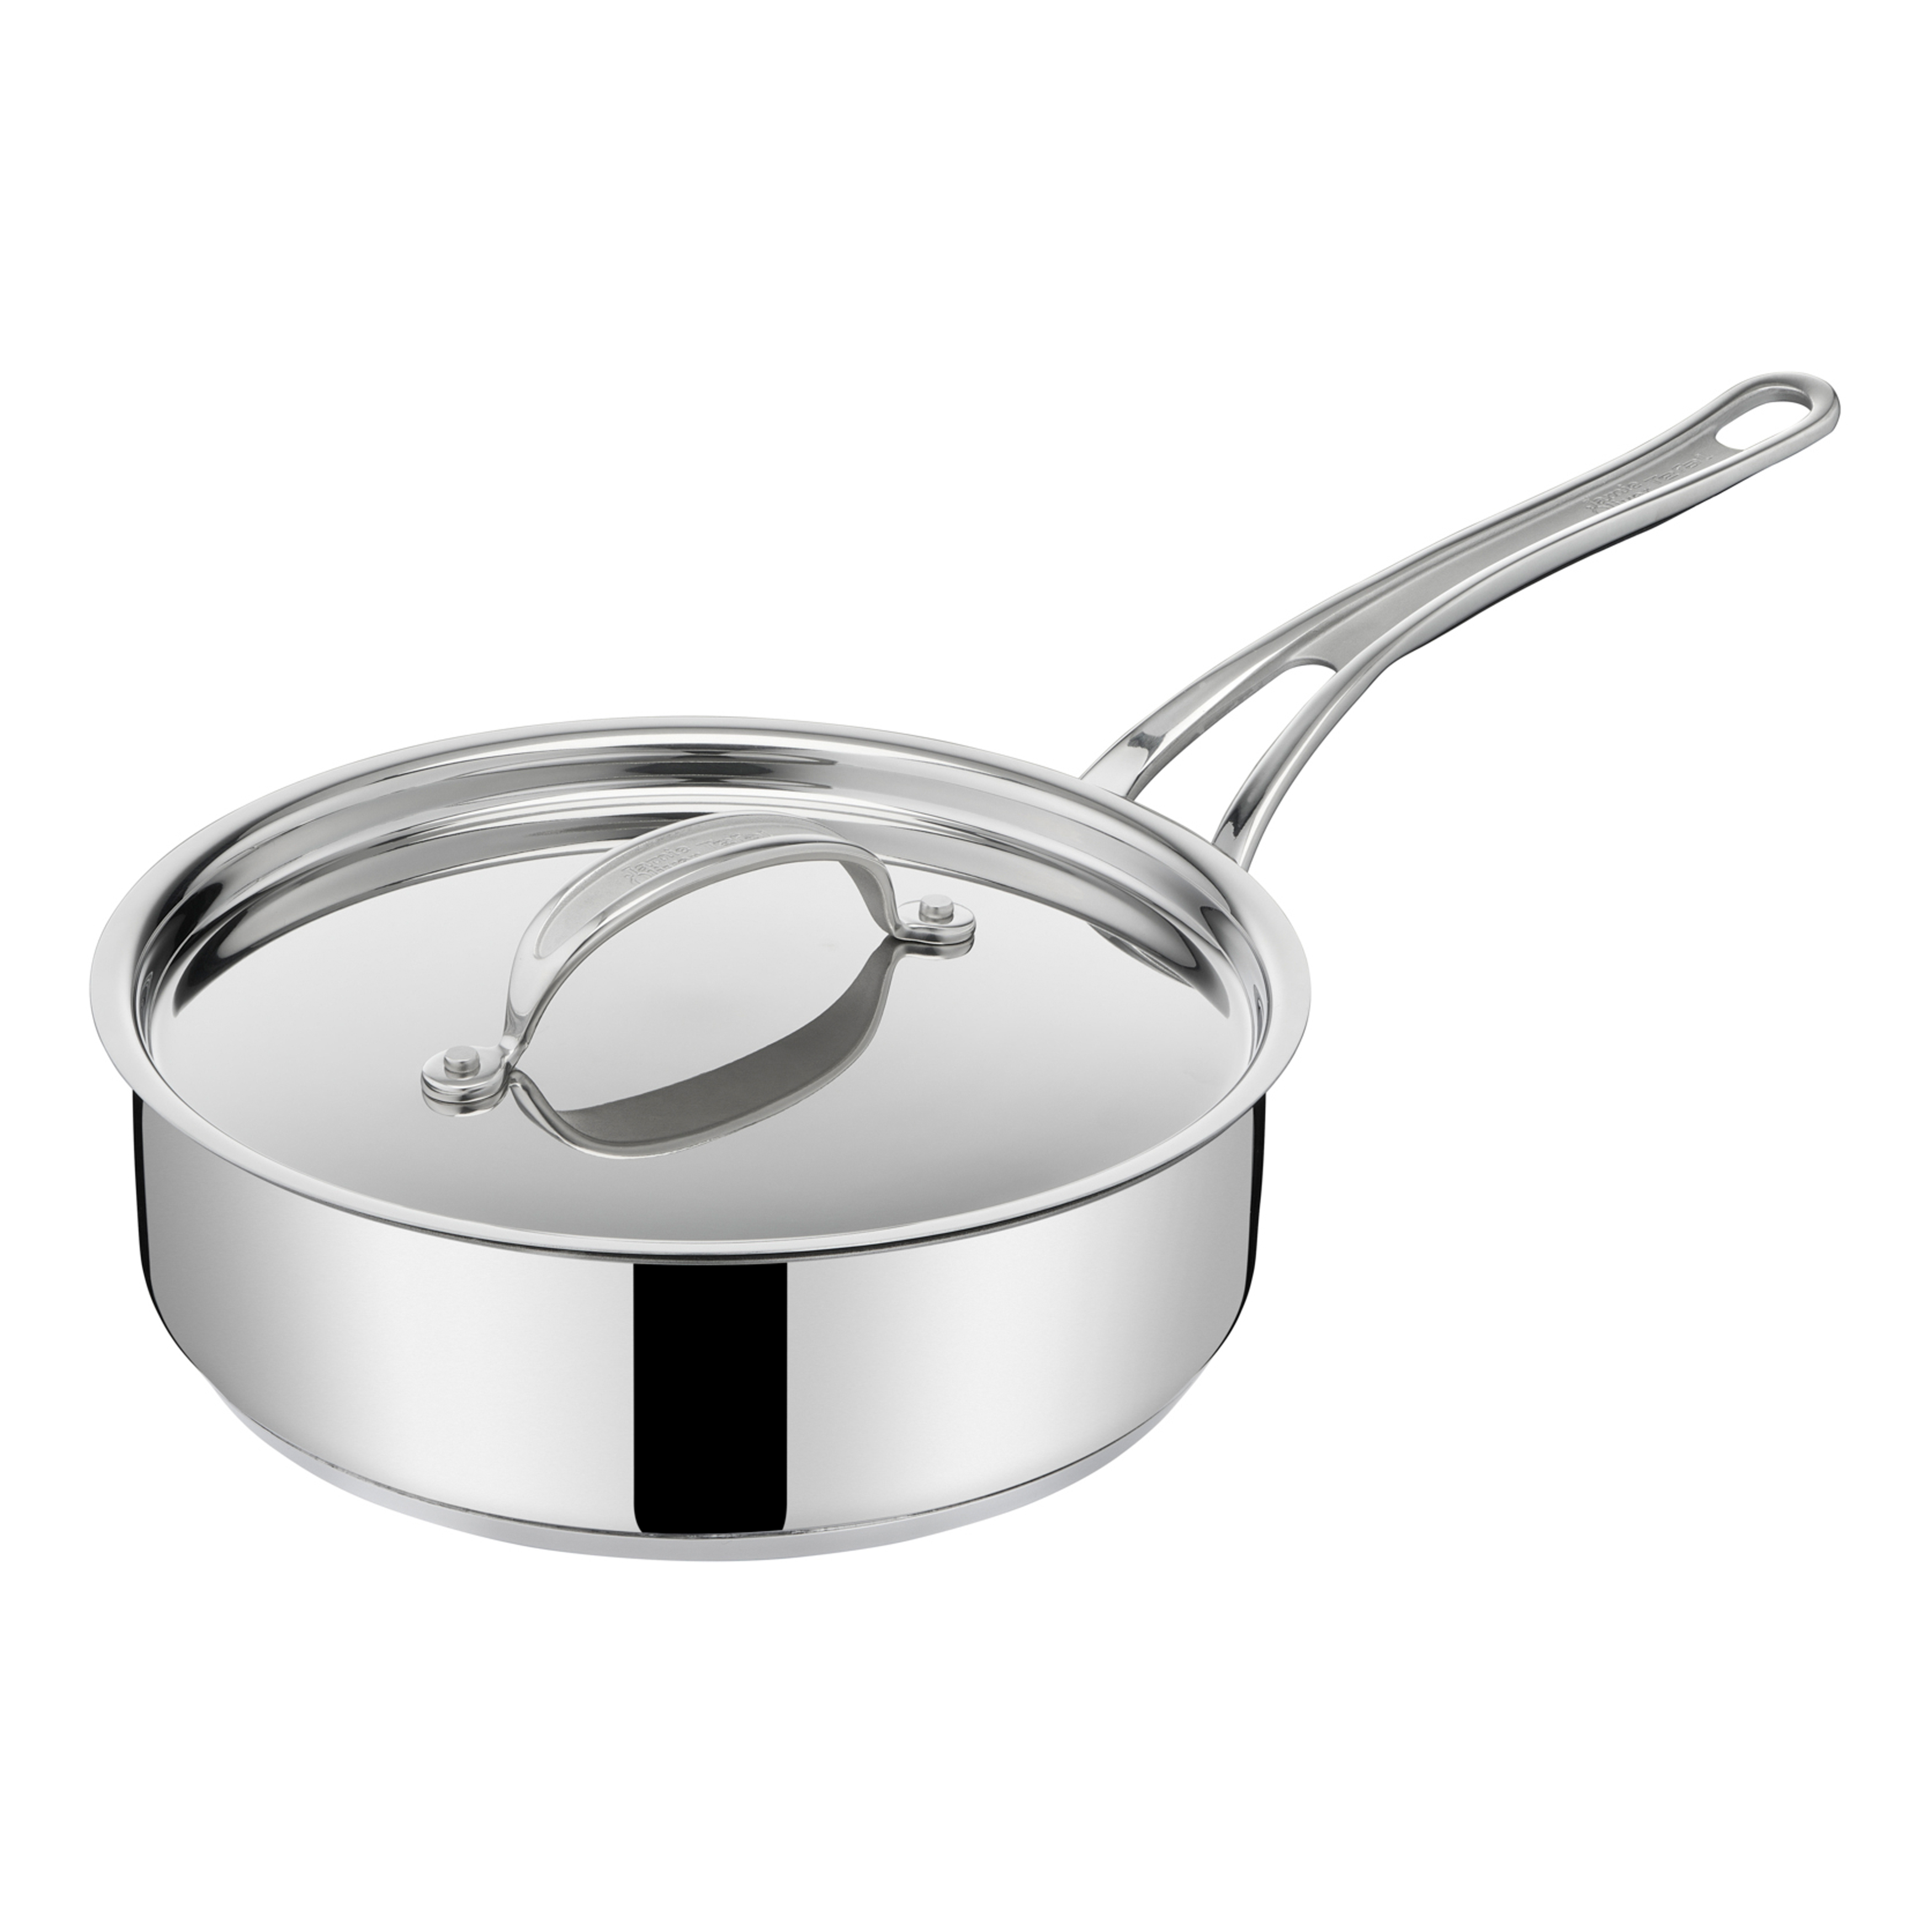 Jamie Oliver Cook's Classics saute pan from Tefal 